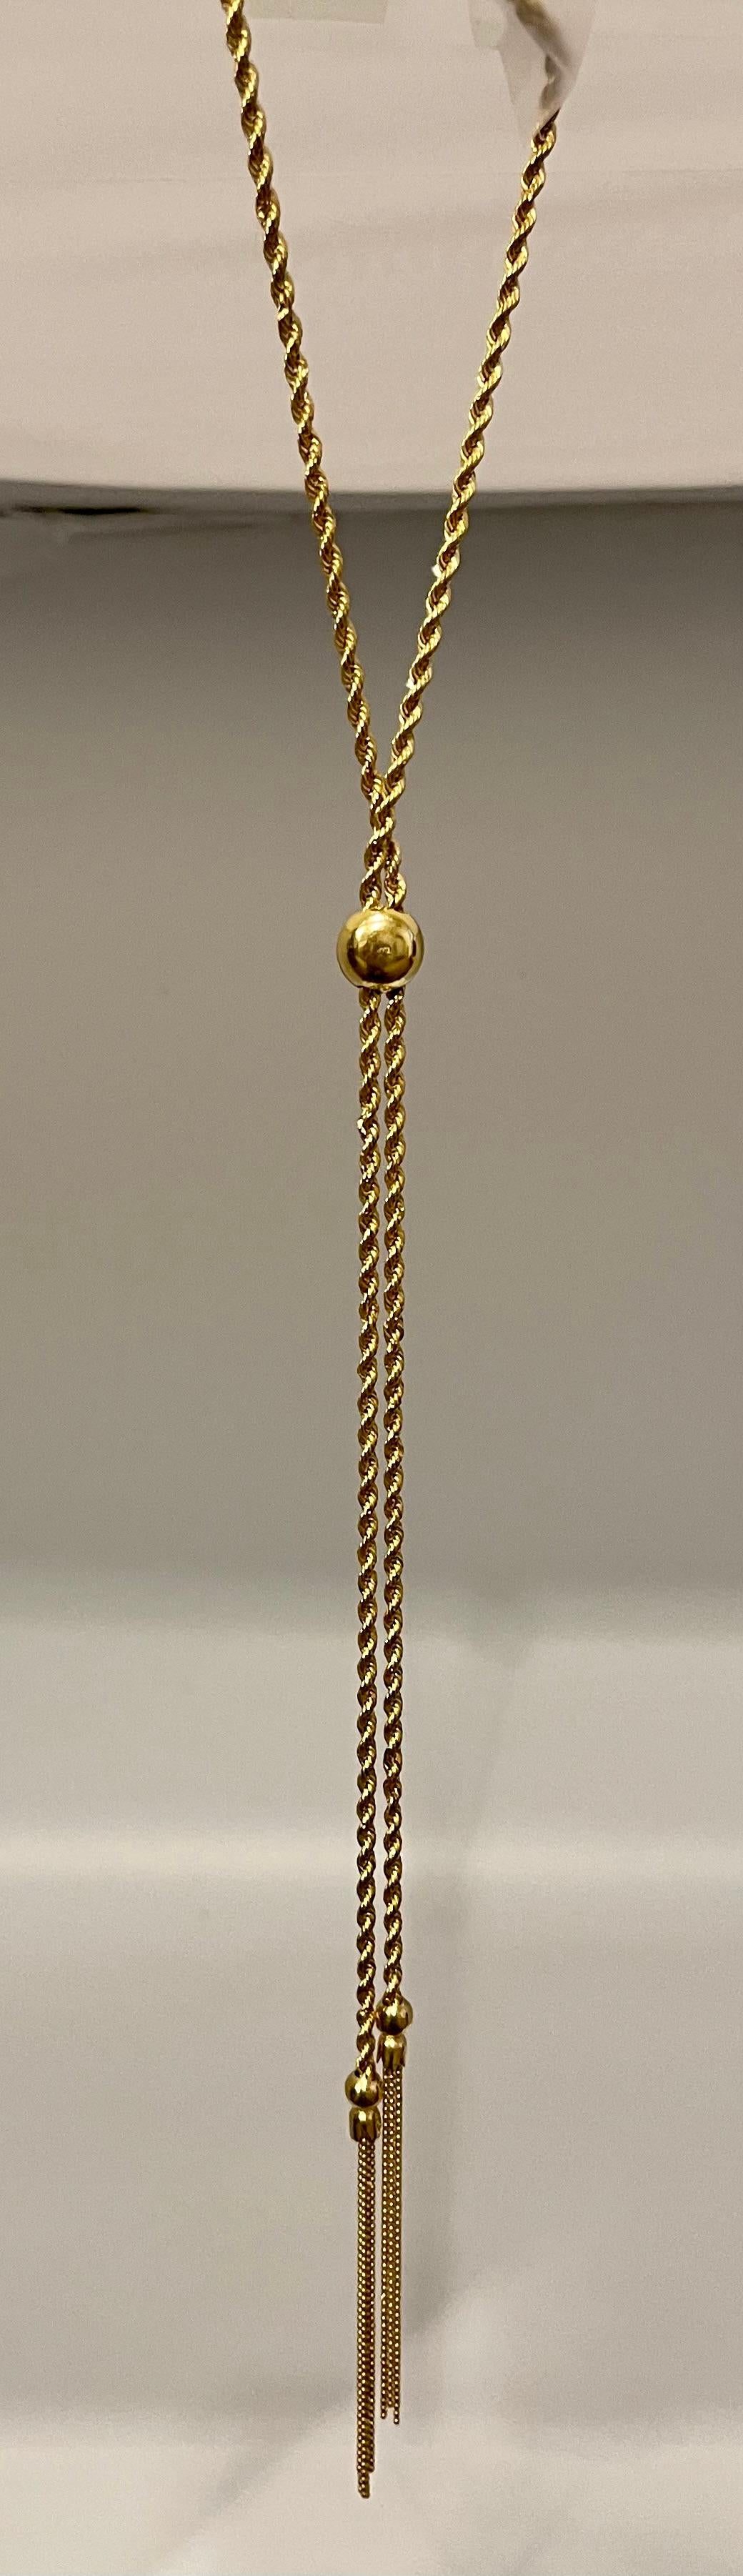 Vintage 18k Gold 18.7 Gm Rope Chain Adjustable Sliding Chain with Ball 12